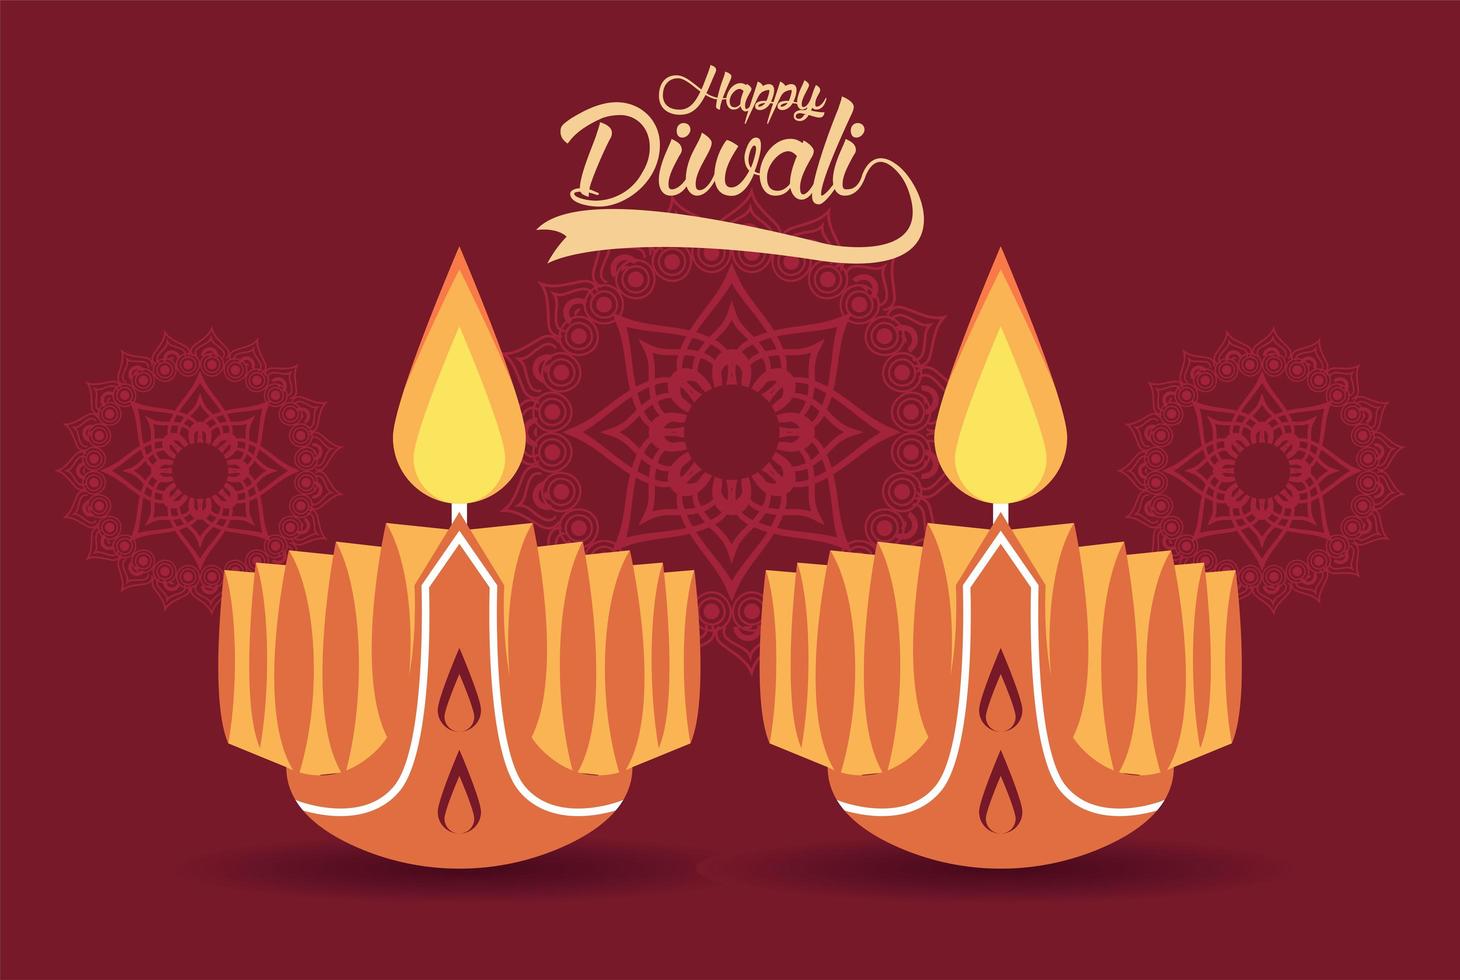 happy diwali celebration with two candles and mandalas vector